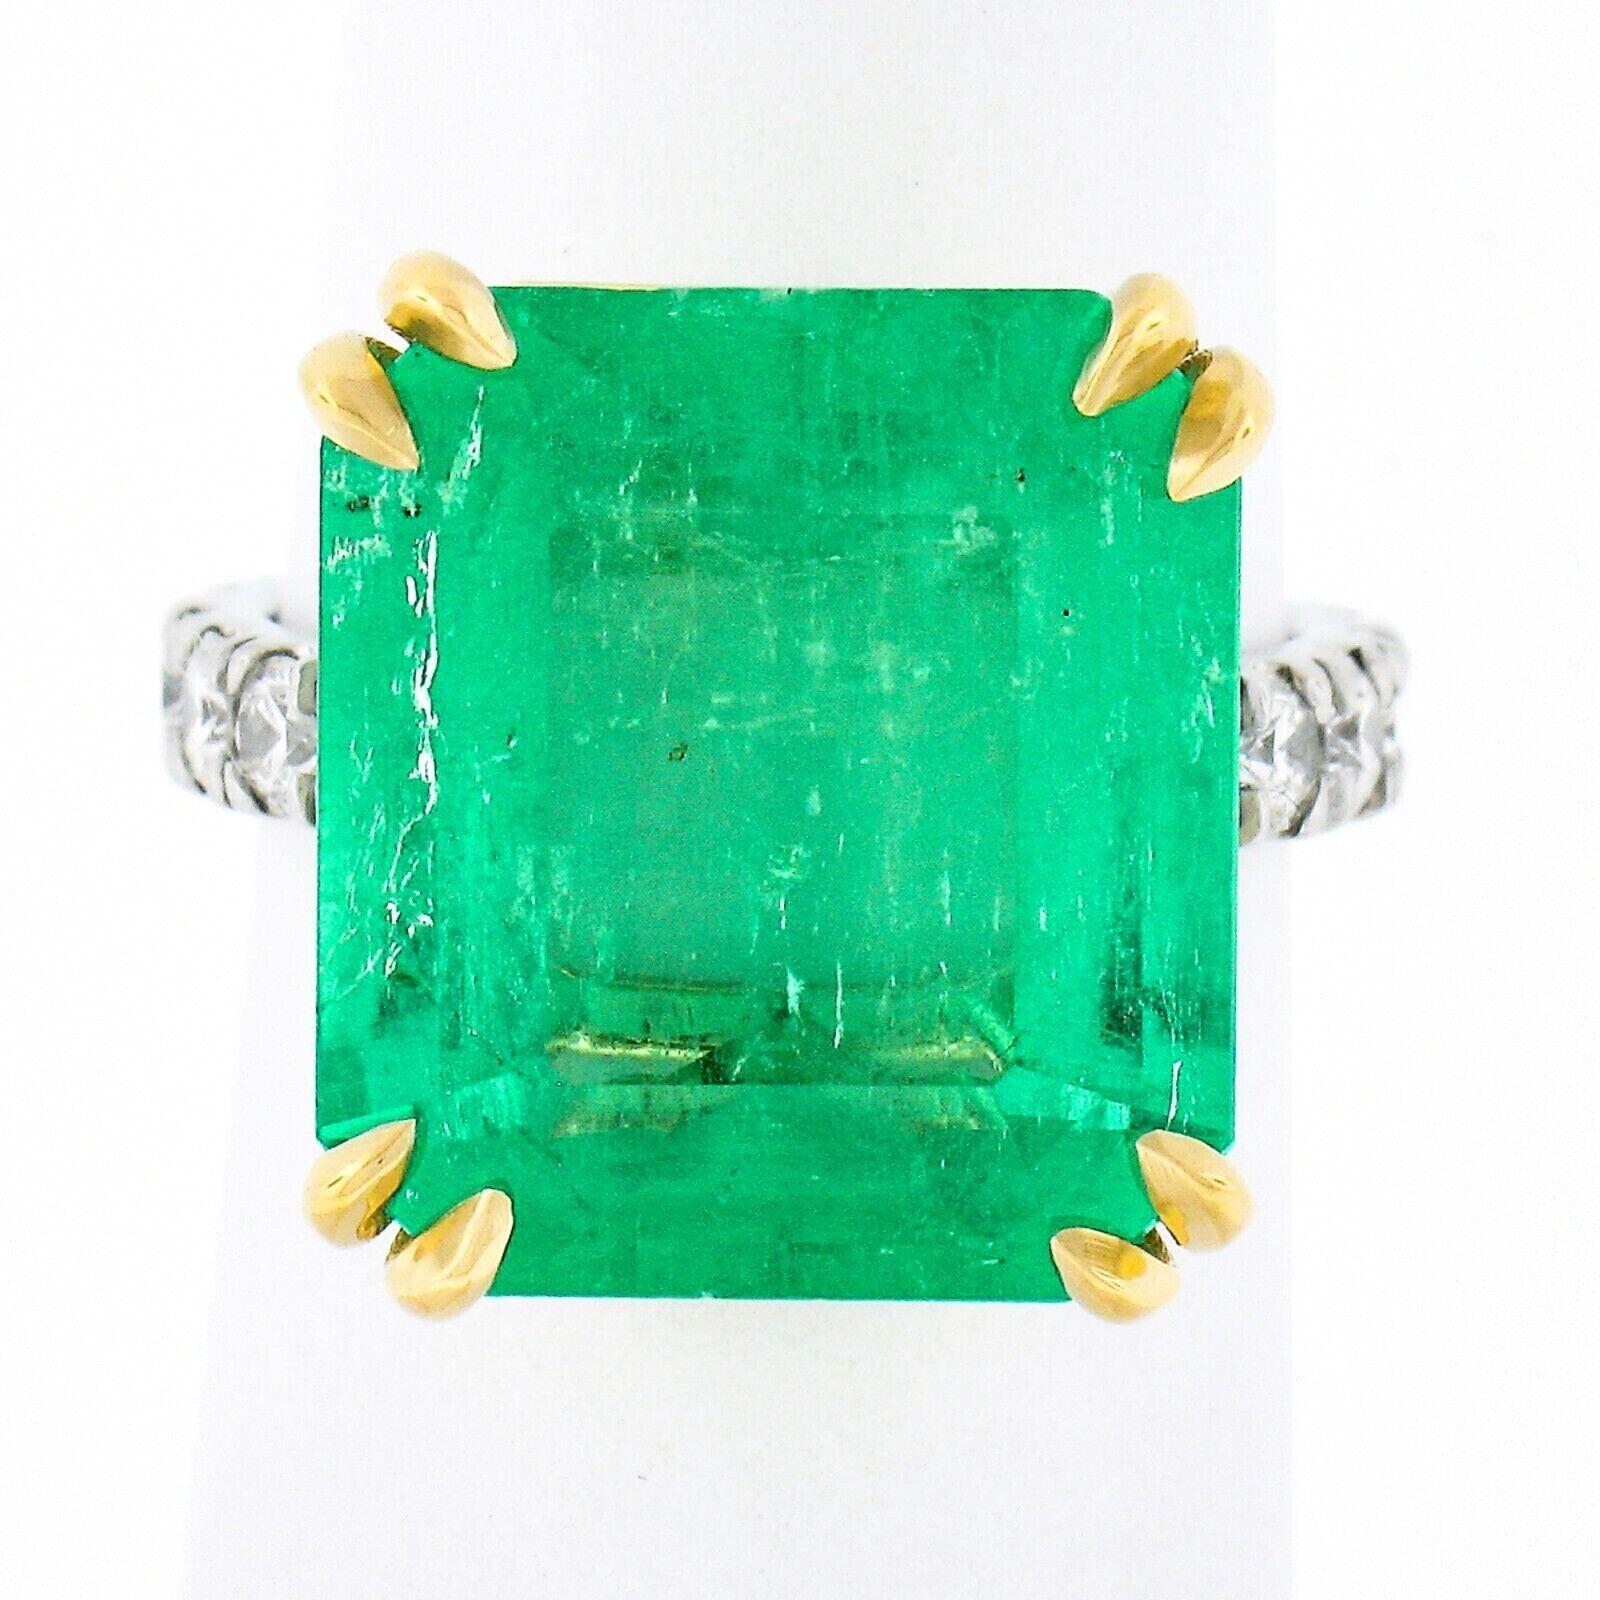 This brand new gorgeous, AGL certified, emerald and diamond cocktail ring was crafted from solid 18k yellow and white gold. It features a breathtaking, natural, emerald that is neatly dual claw prong set at the center, displaying a large size and is